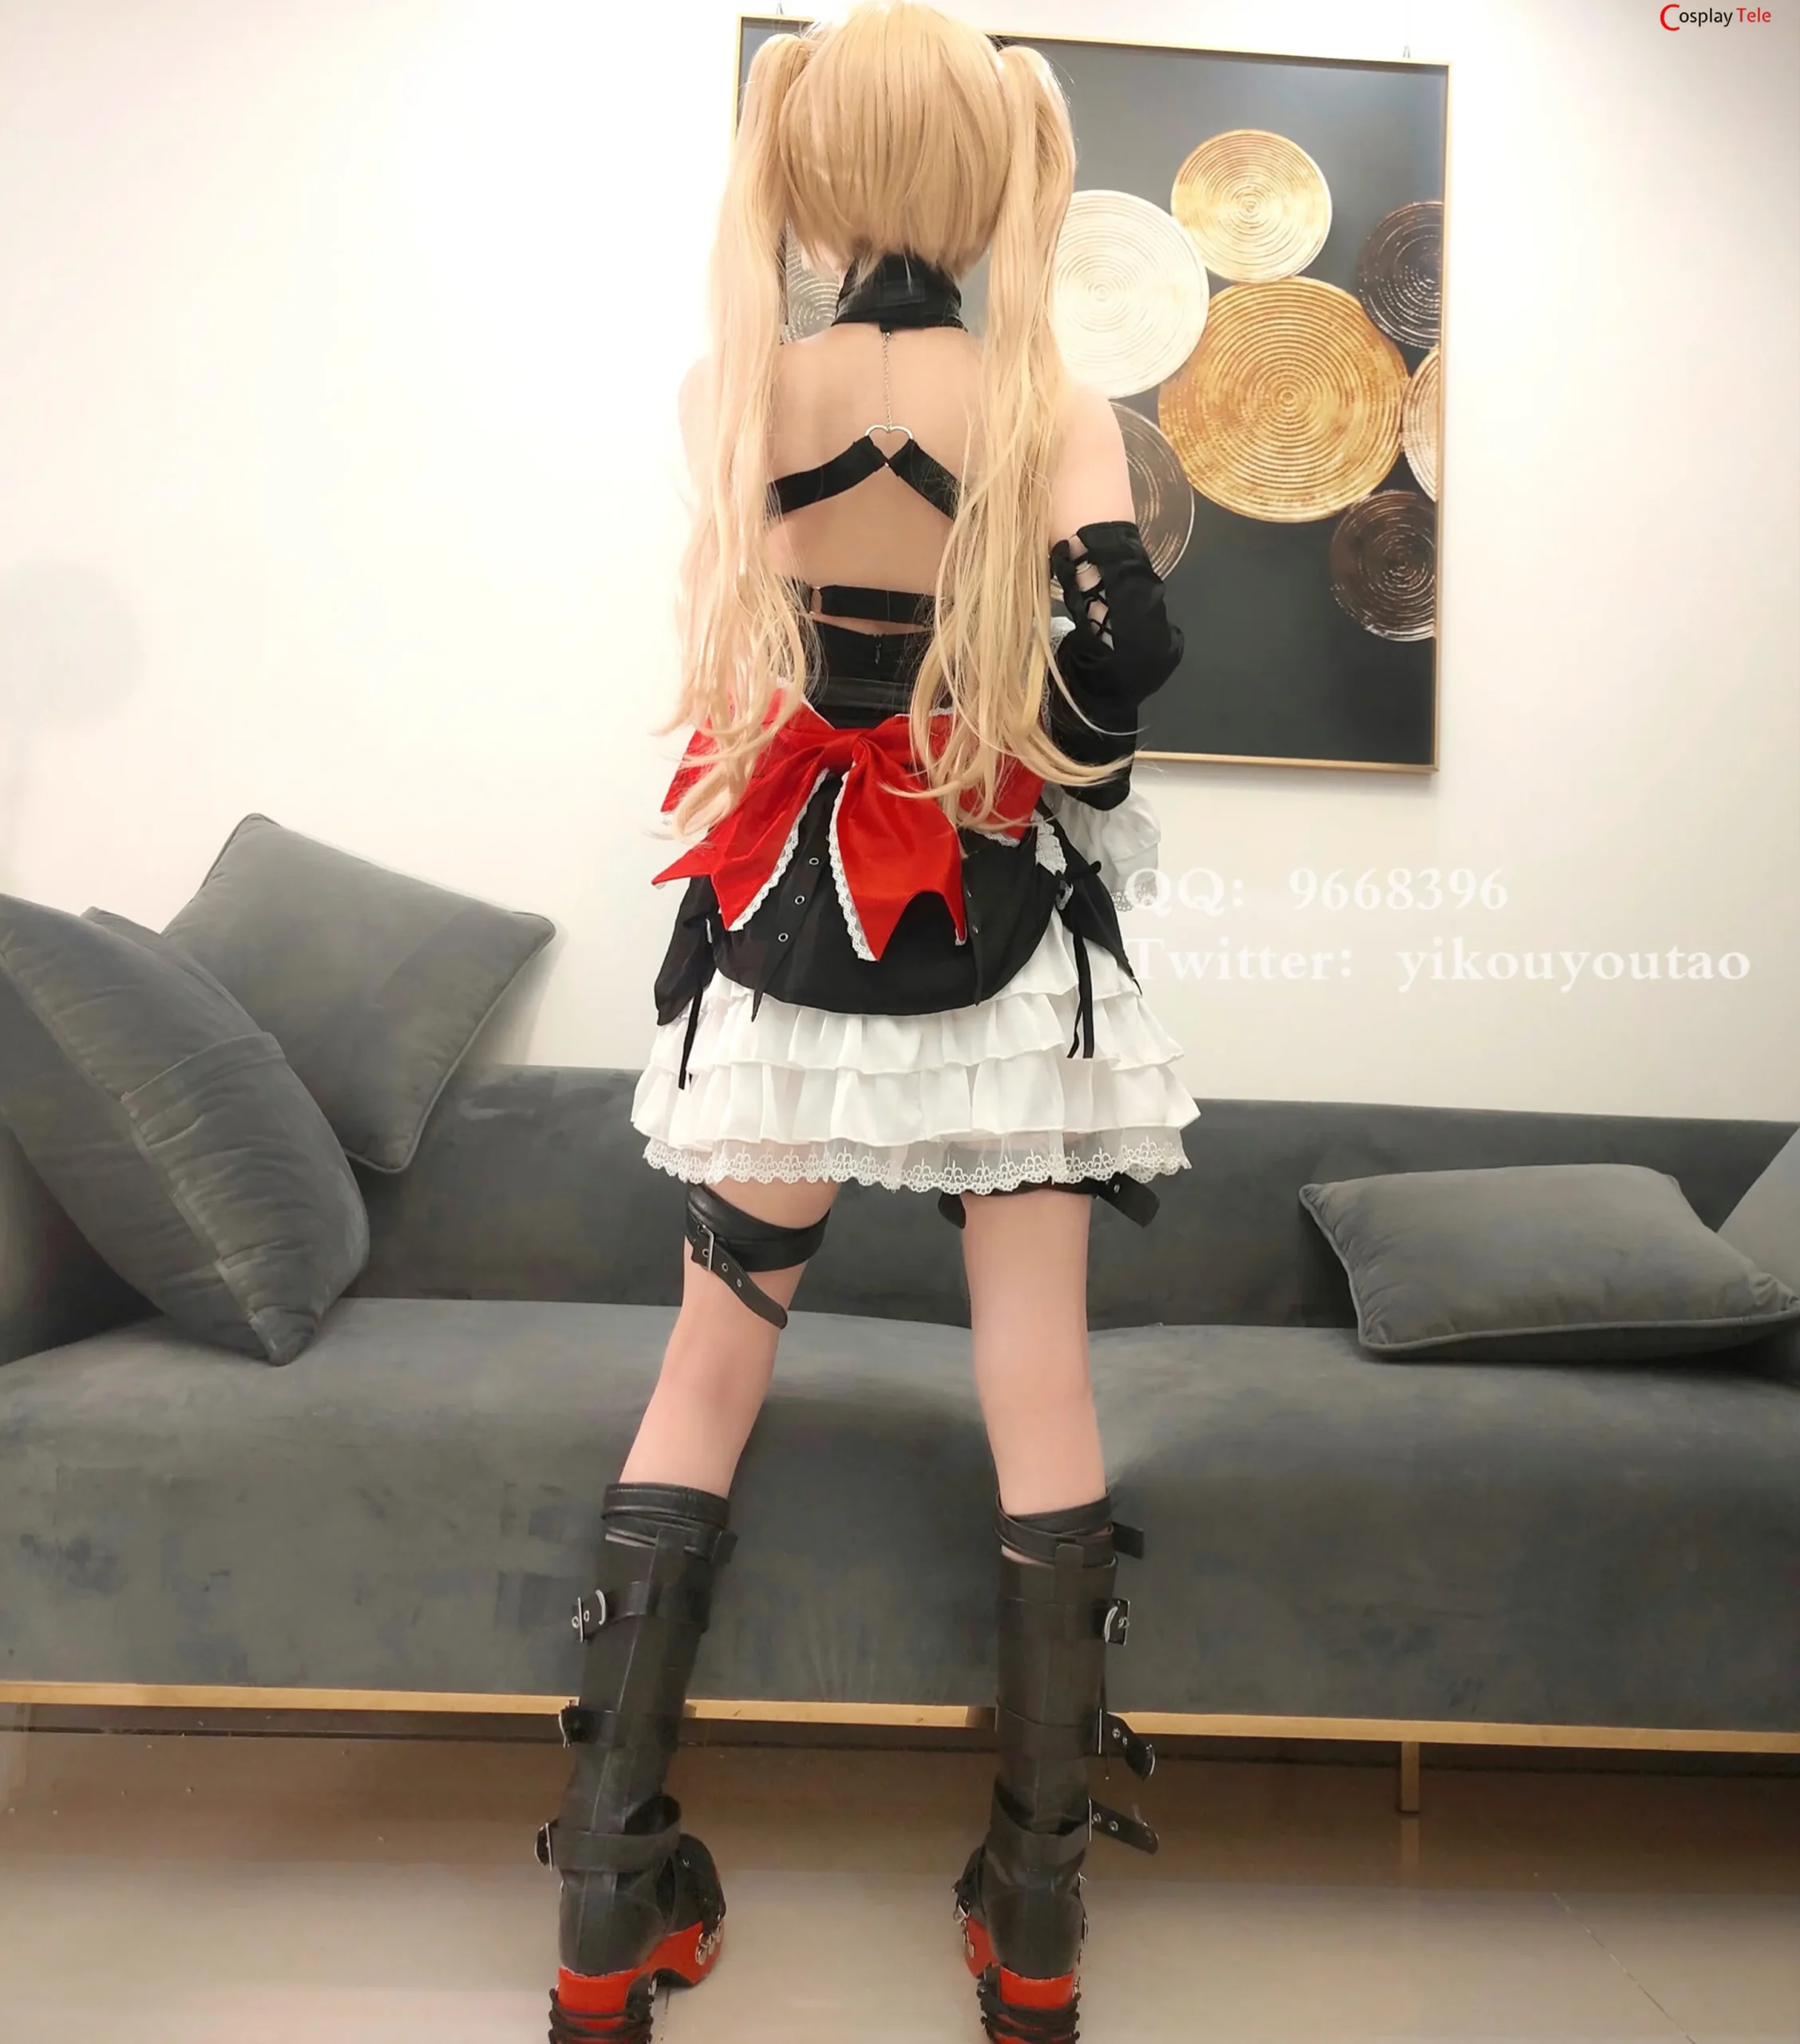 Marie rose sex doll